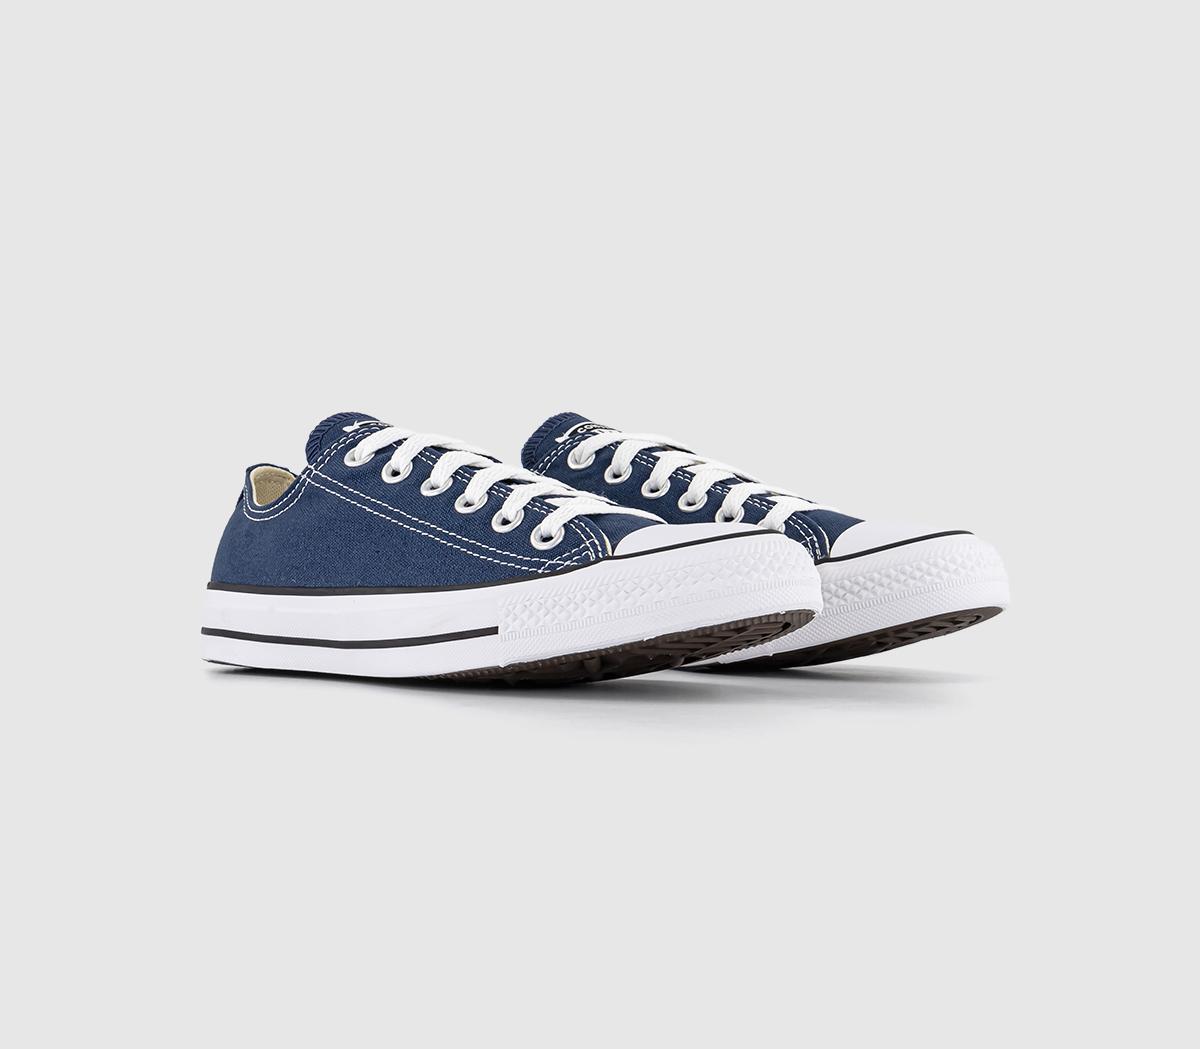 Mens Converse All Star Low Canvas Trainers In Navy Blue And White, 11